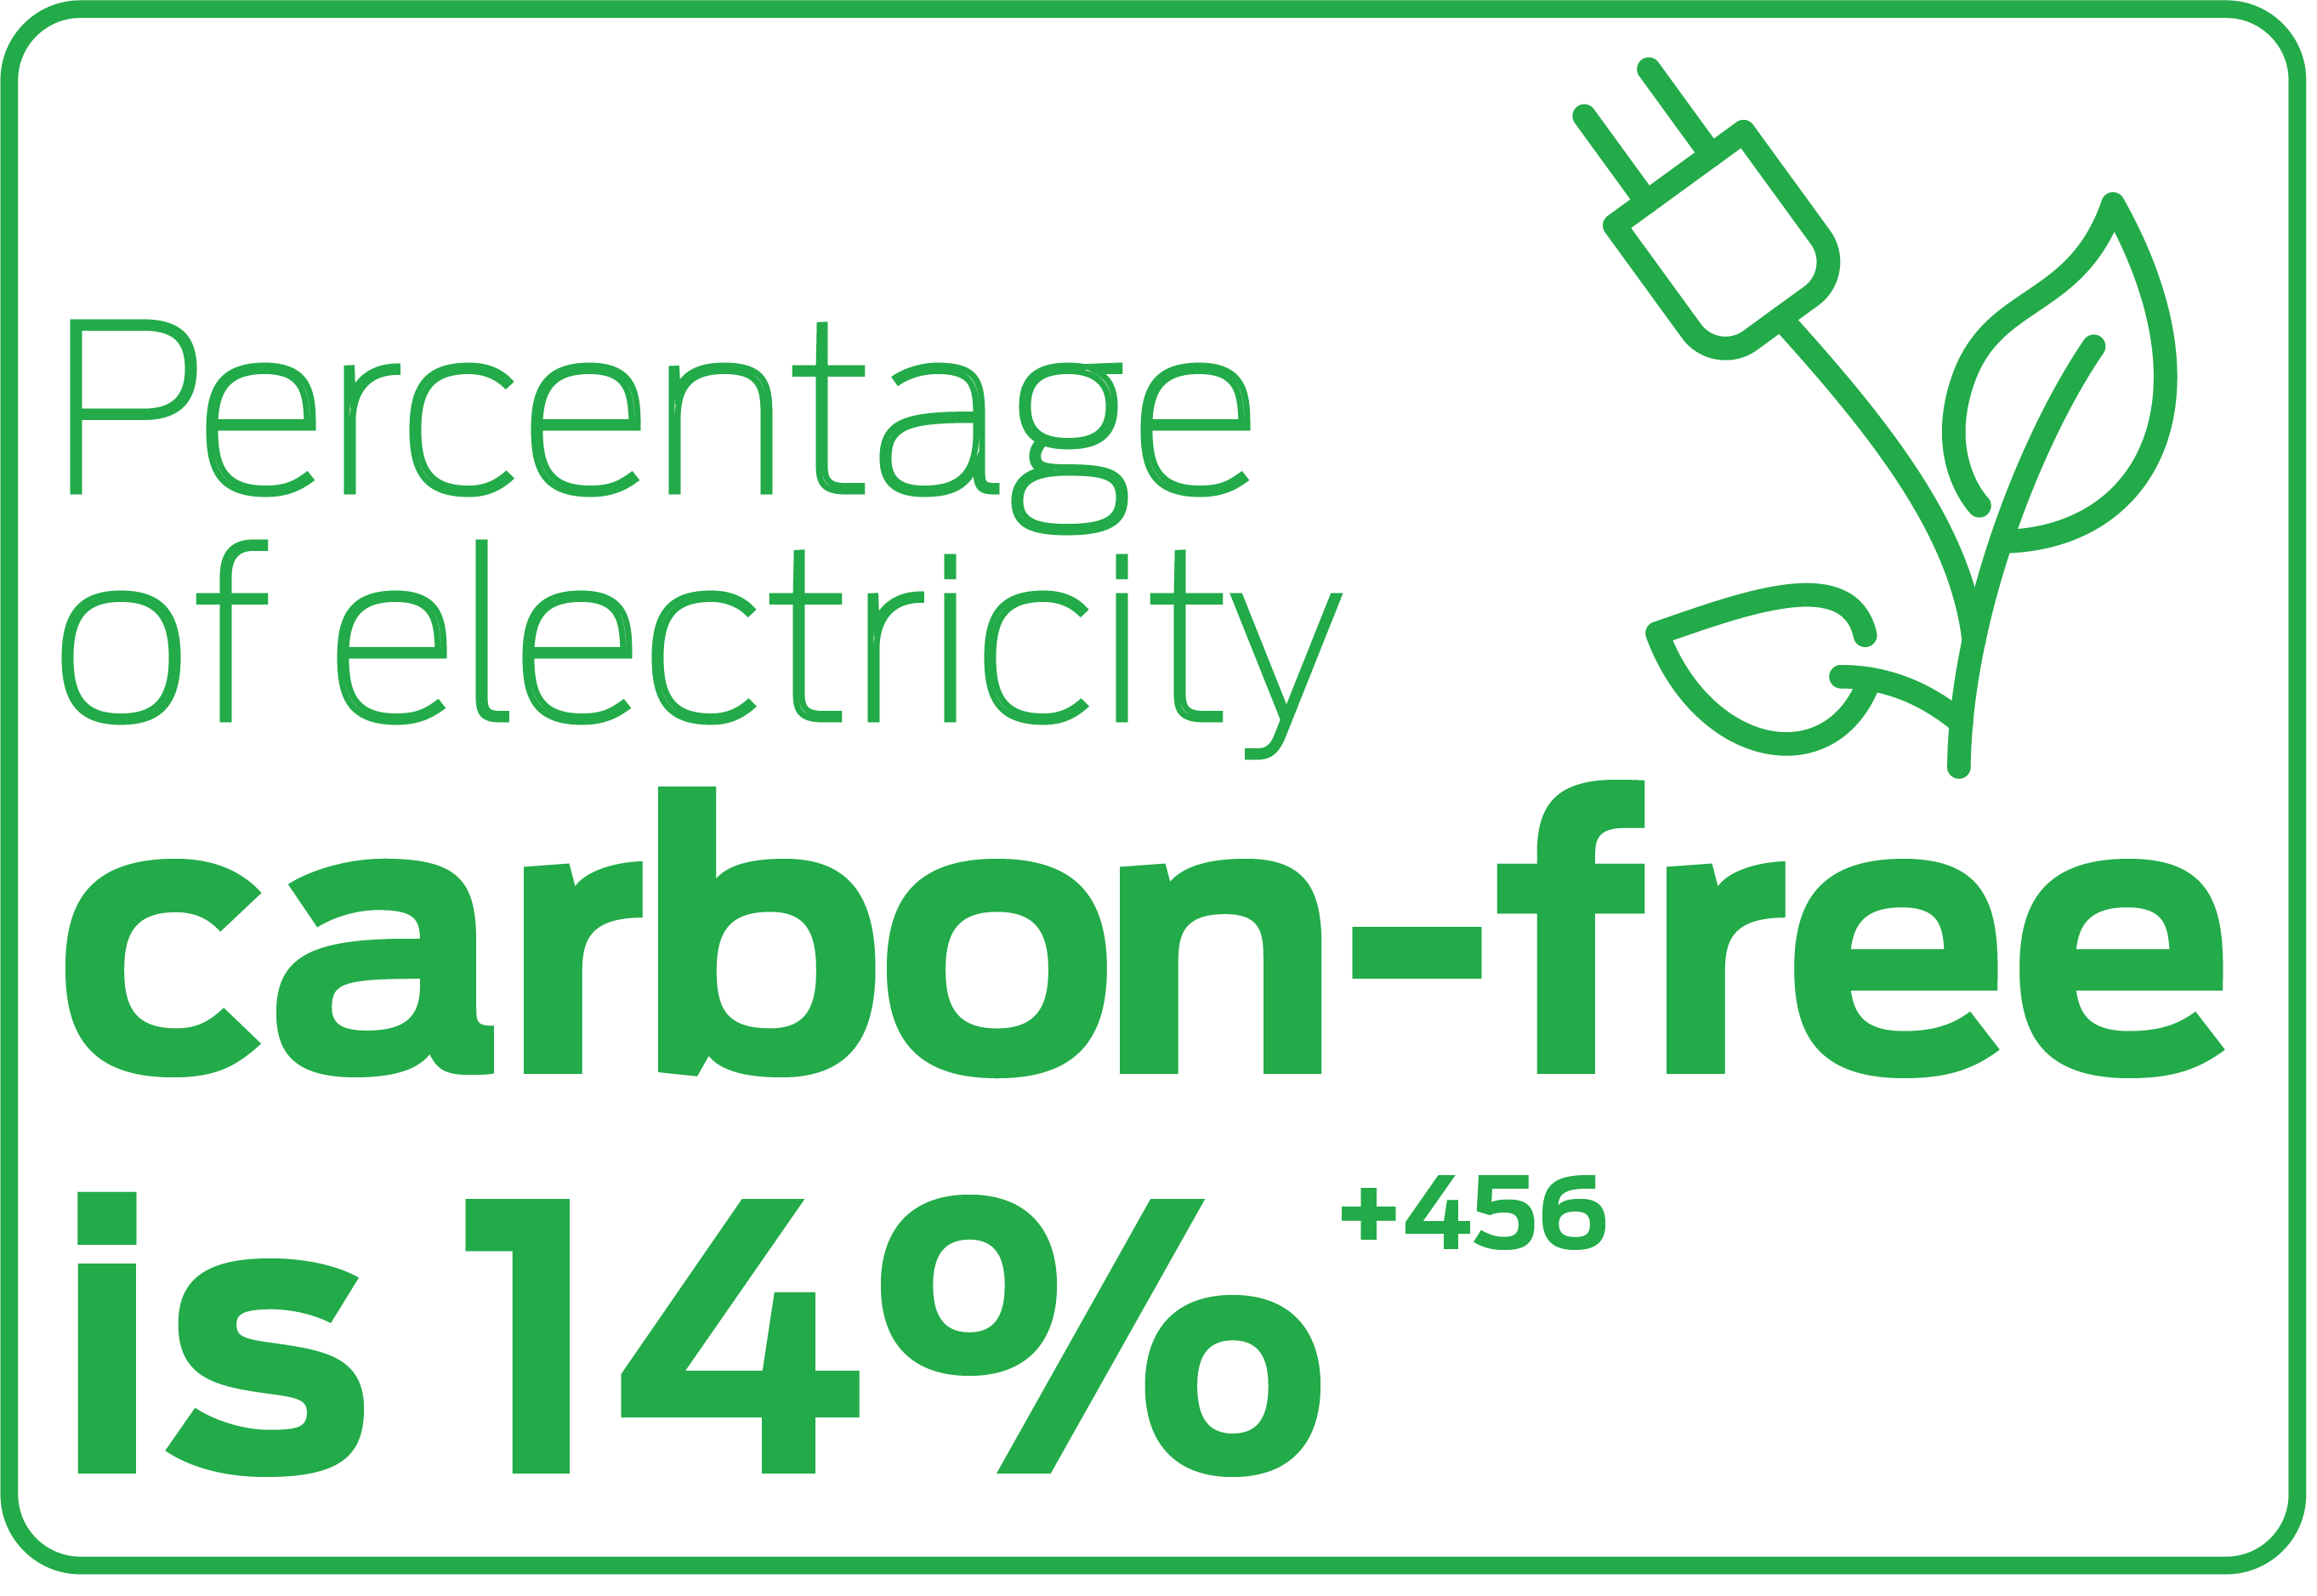 Percentage of electricity carbon-free is 14%